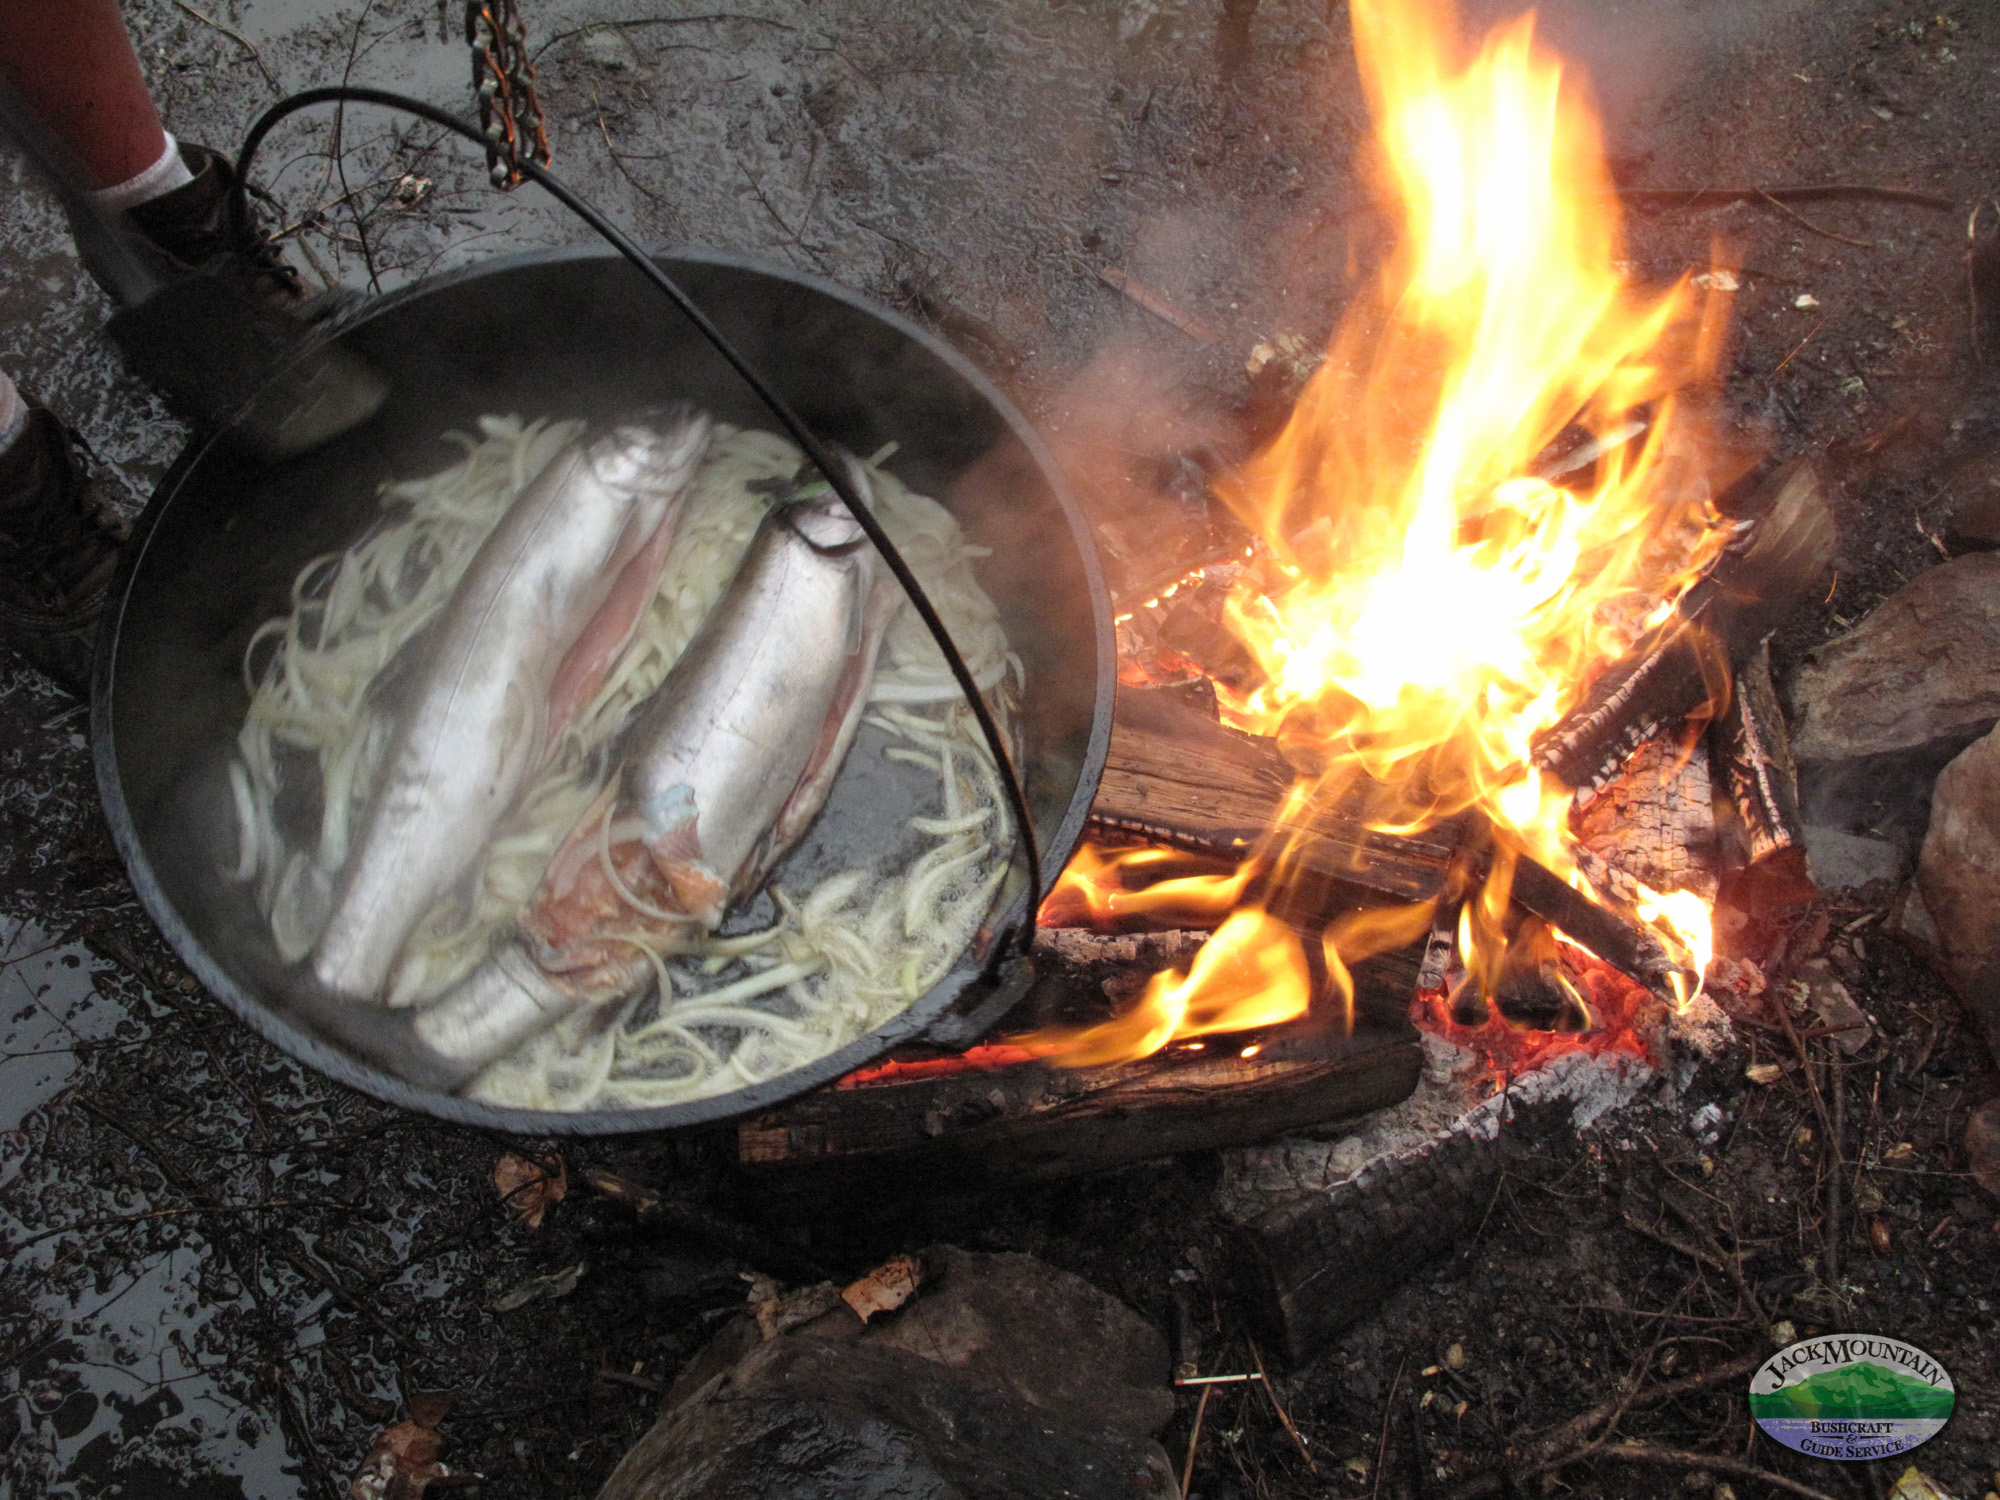 Jack Mountain In The Orvis News: 5 Bushcraft Tips For Anglers